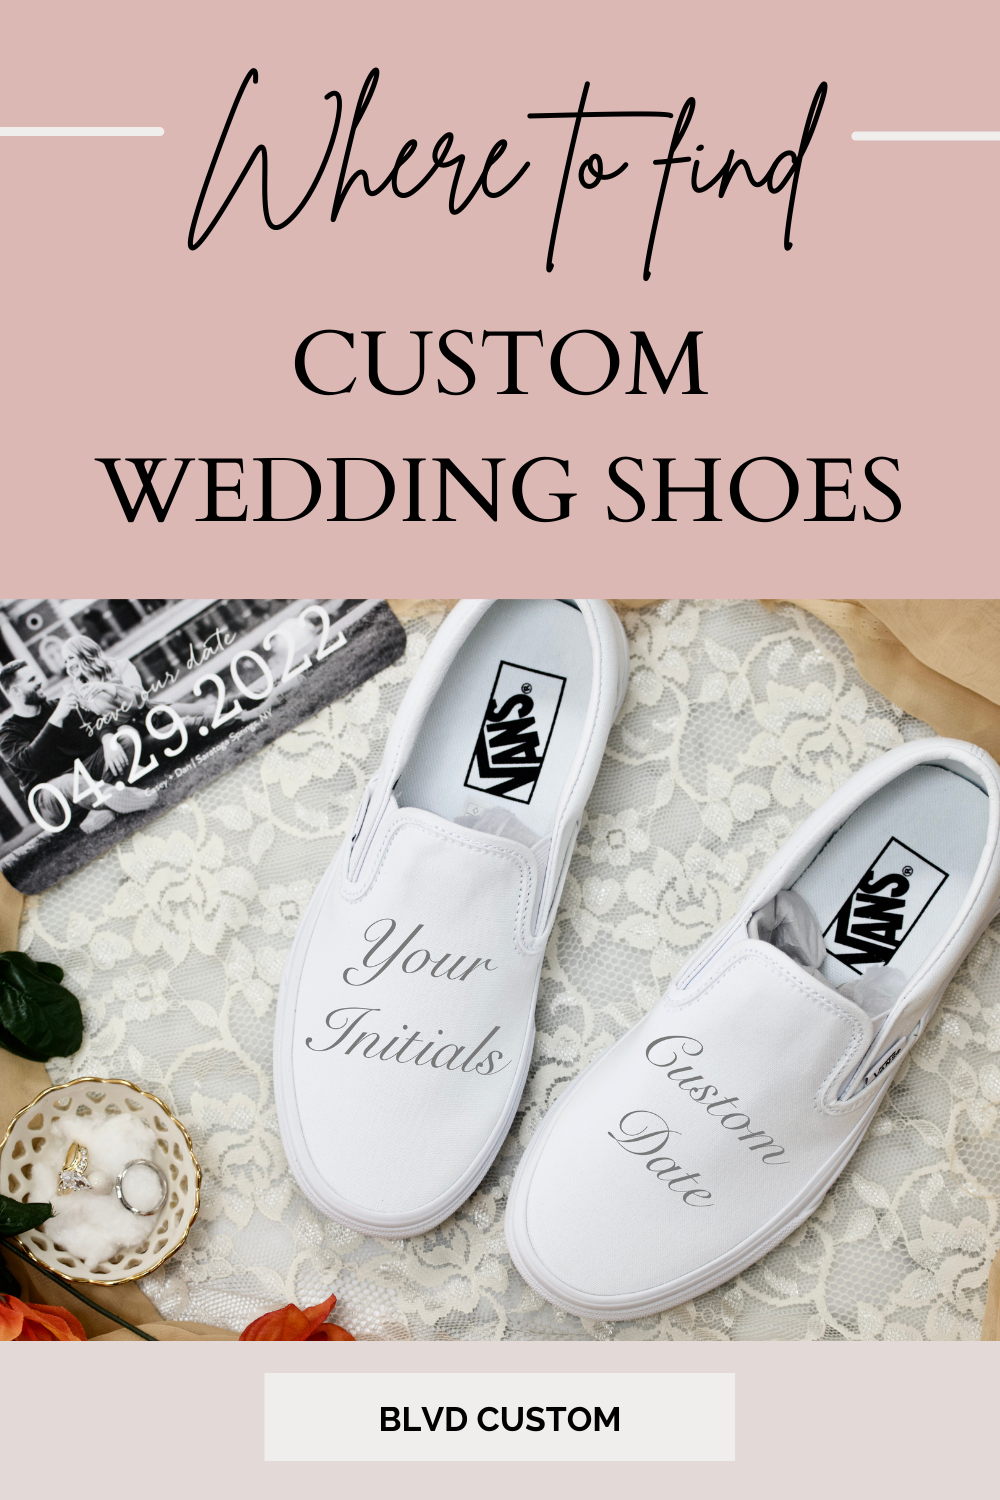 Where to Find Custom Wedding Shoes for the Big Day!